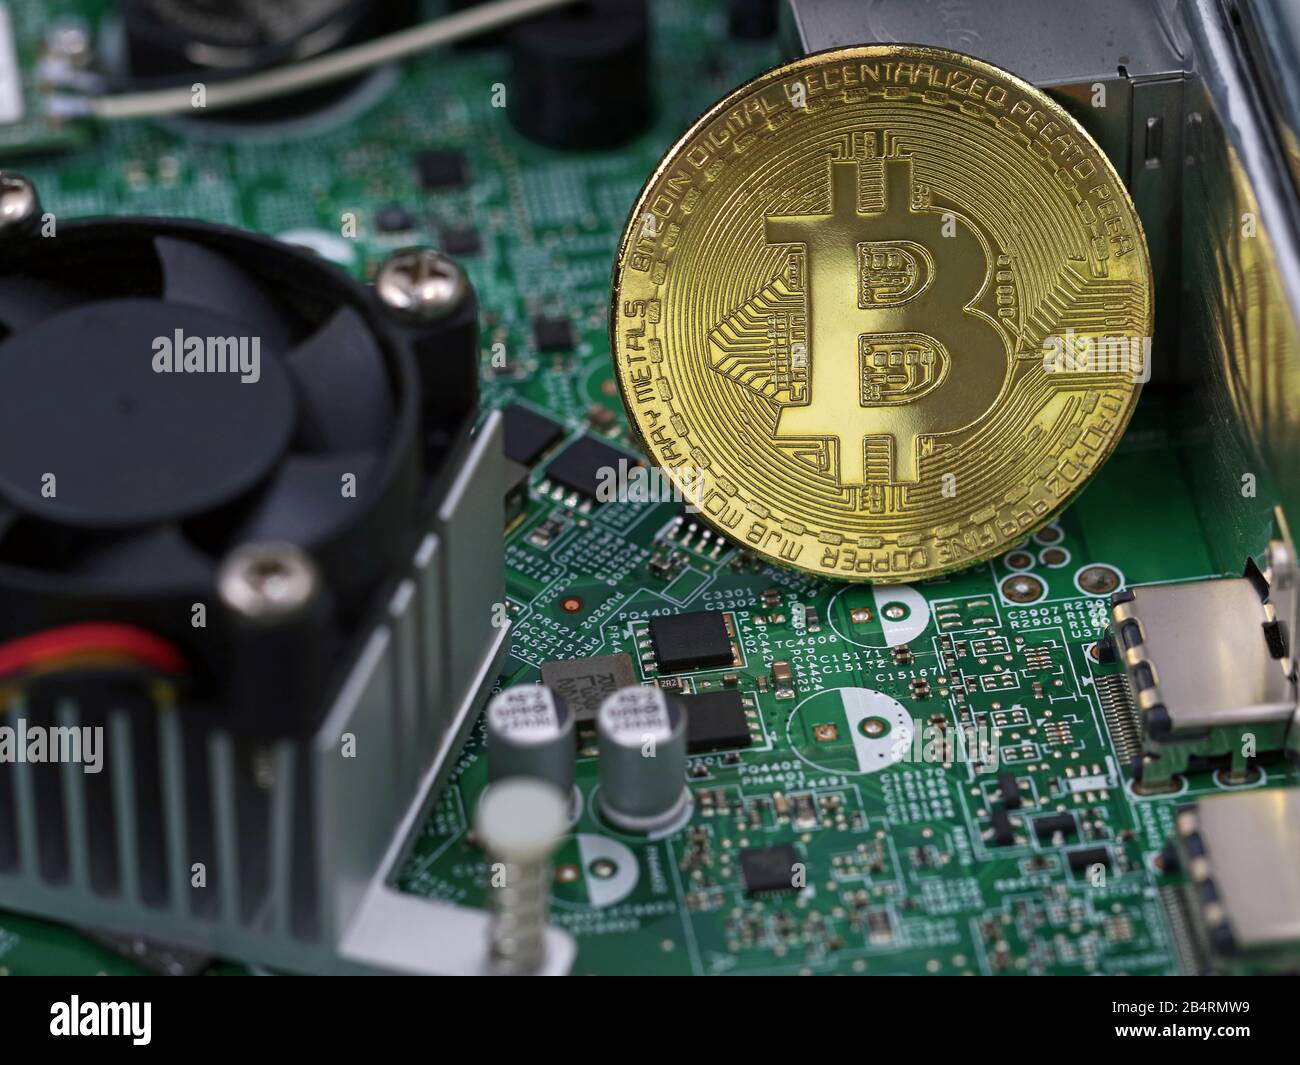 Bitcoin golden coin on computer motherboard between microchips and processor, concept of virtual cryptocurrency Stock Photo